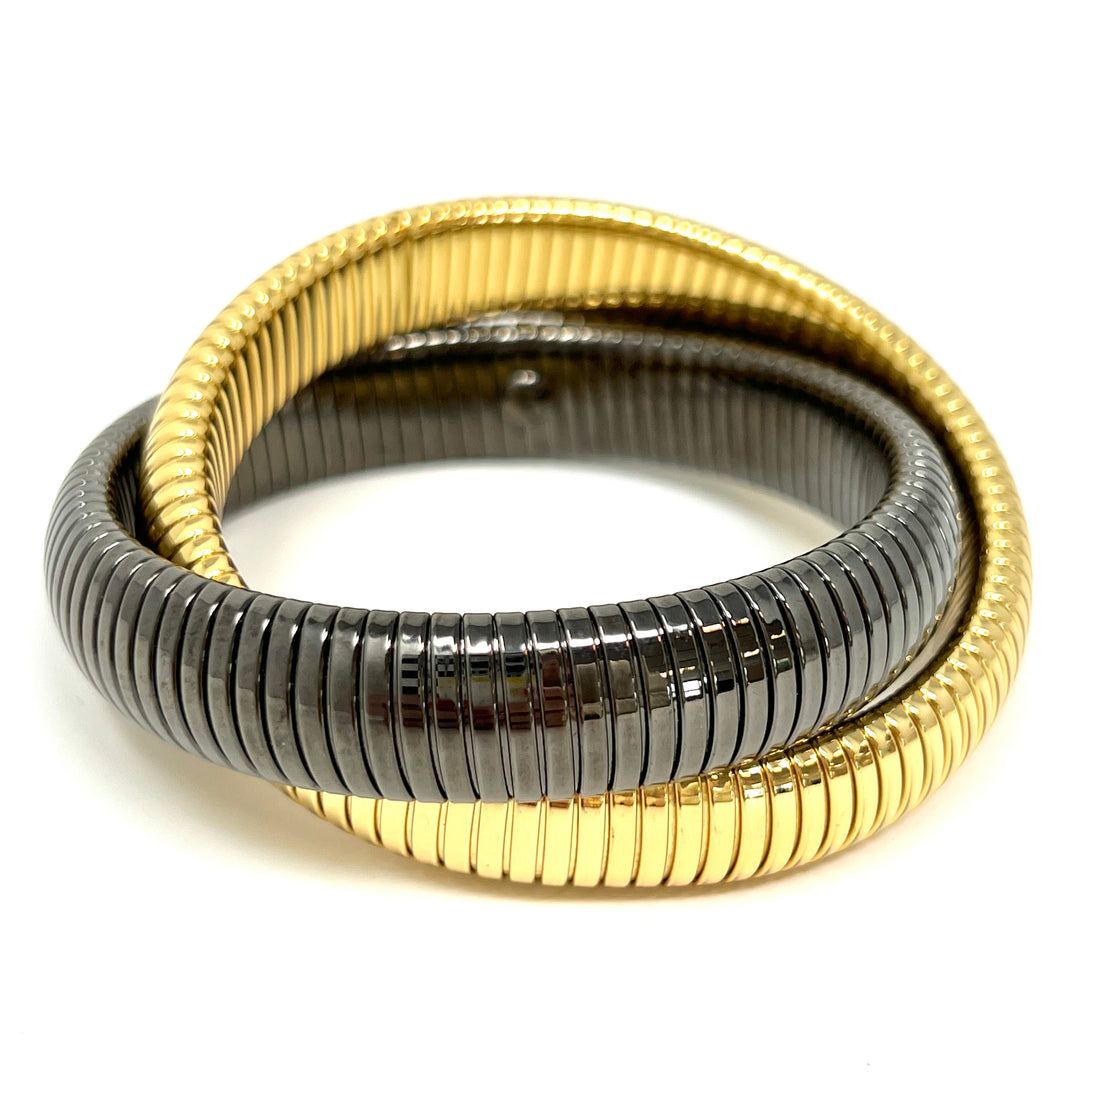 Two Tone Double Coil in Gold/ Gunmetal